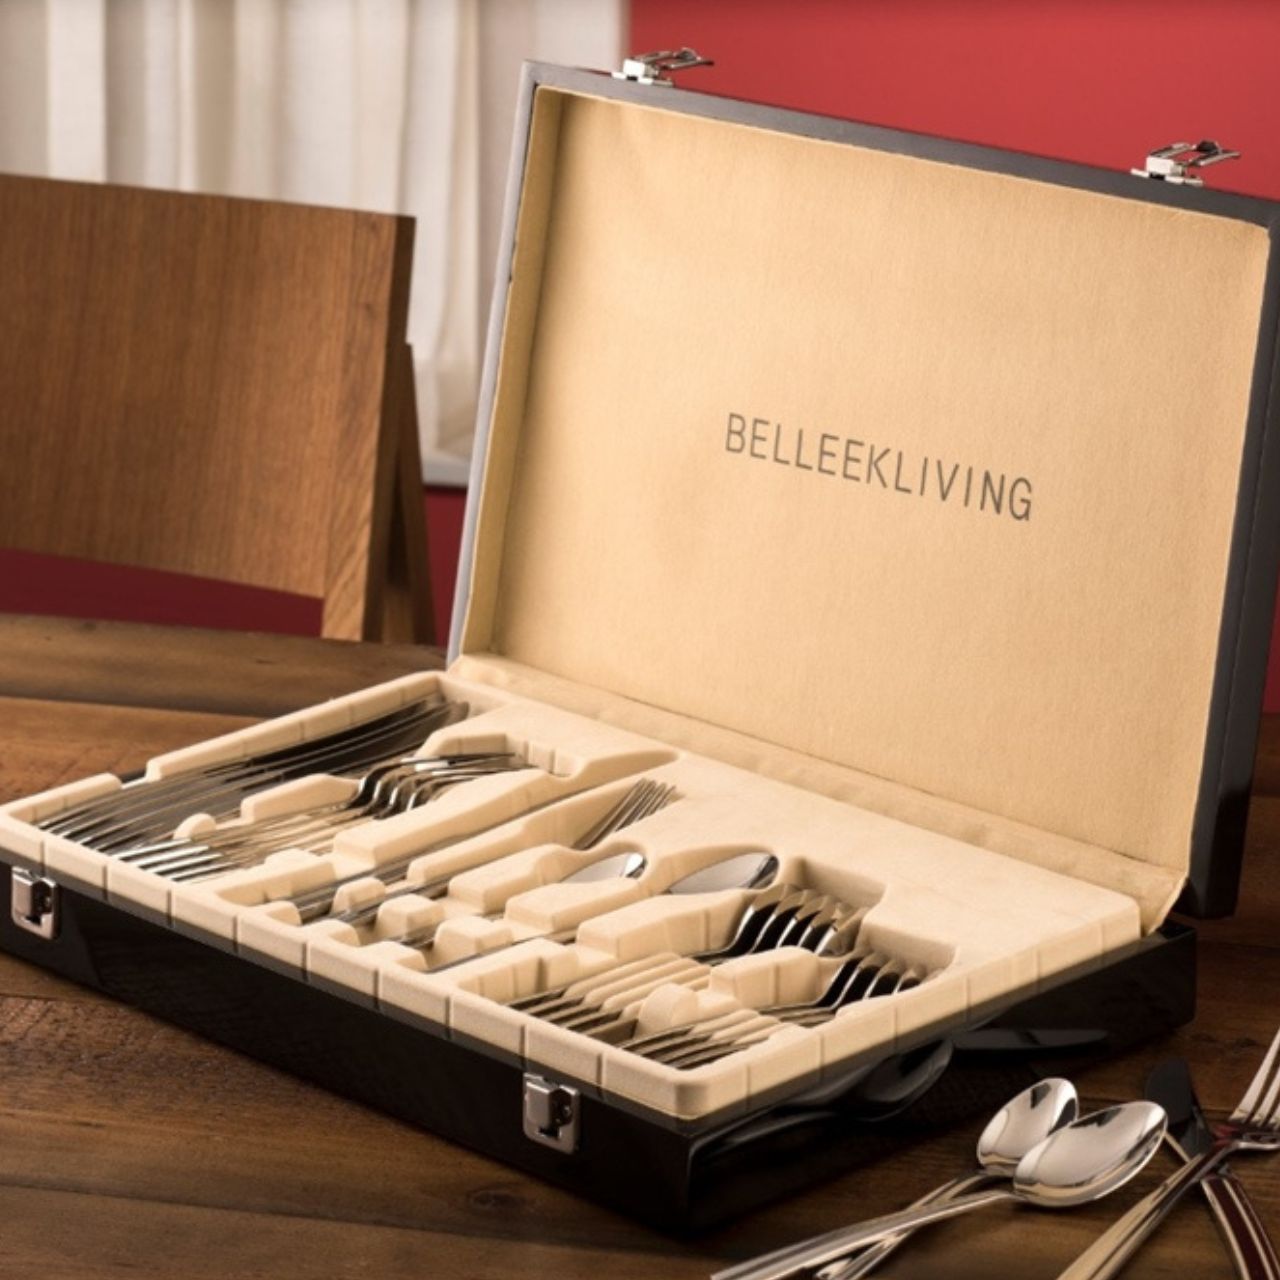 Occasions 24-Piece Cutlery Set in Wood Box by Belleek Living  Dine in style with the Occasions 24-Piece Cutlery Set from Belleek Living. Each piece displays high-quality craftmanship synonymous with the Belleek Living brand - beautifully polished 18/10 Stainless Steel with a smooth & elegant design. Perfect for everyday use, as a wedding gift, housewarming gift or any special occasion!